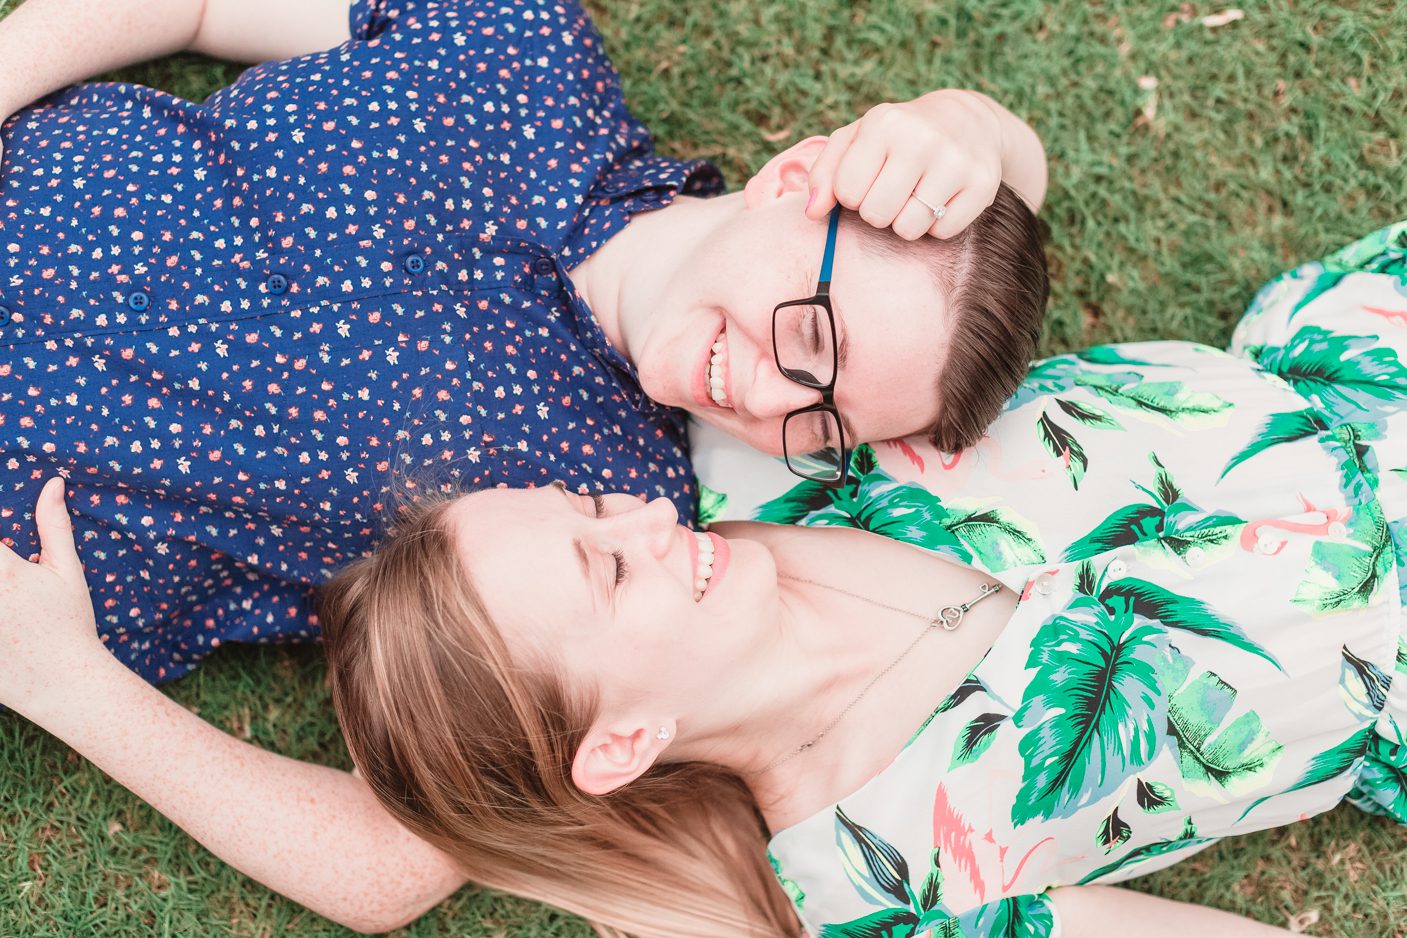 Lesbian engagement photo laying in the grass captured by top Orlando gay friendly wedding photographer